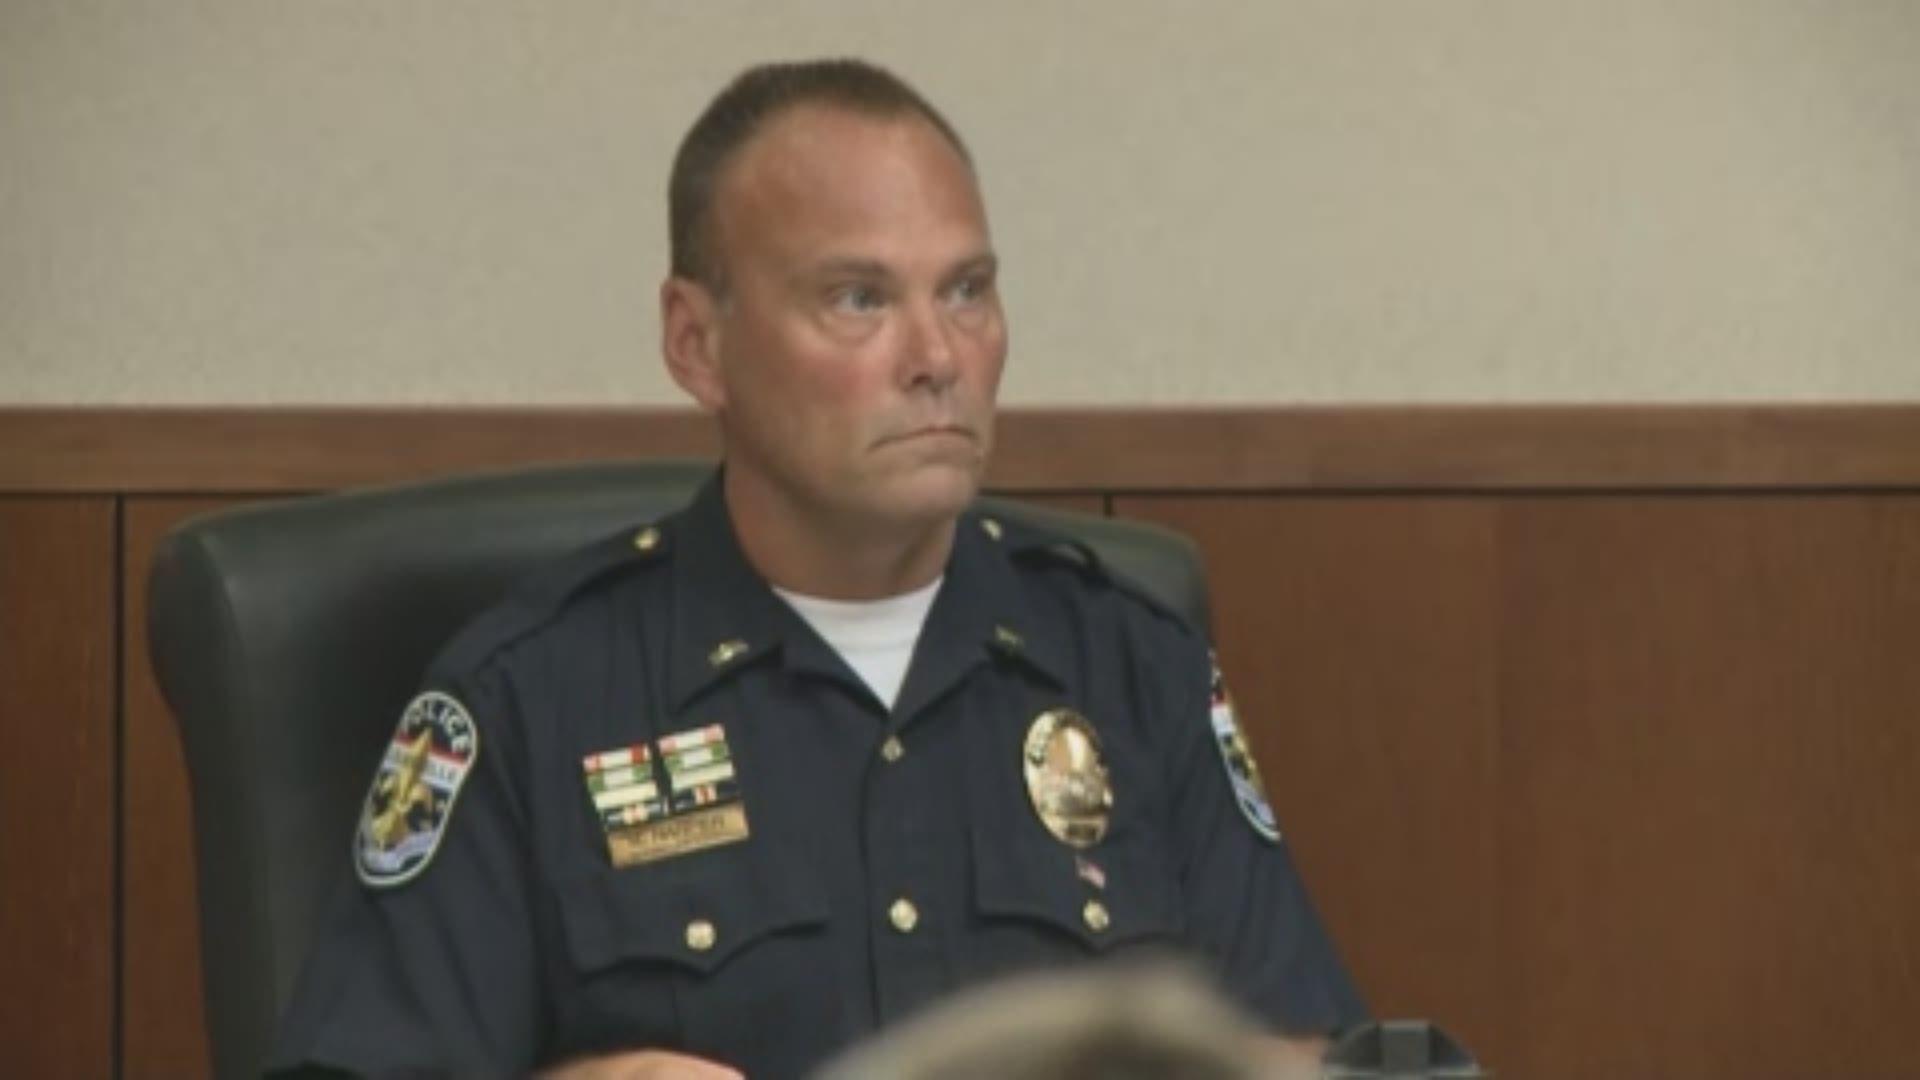 Louisville Metro Police Officer Jimmy Harper is suing the city in a whistle-blower case and he took the stand on Aug. 13.  He is trying to convince the jury he was unfairly demoted.